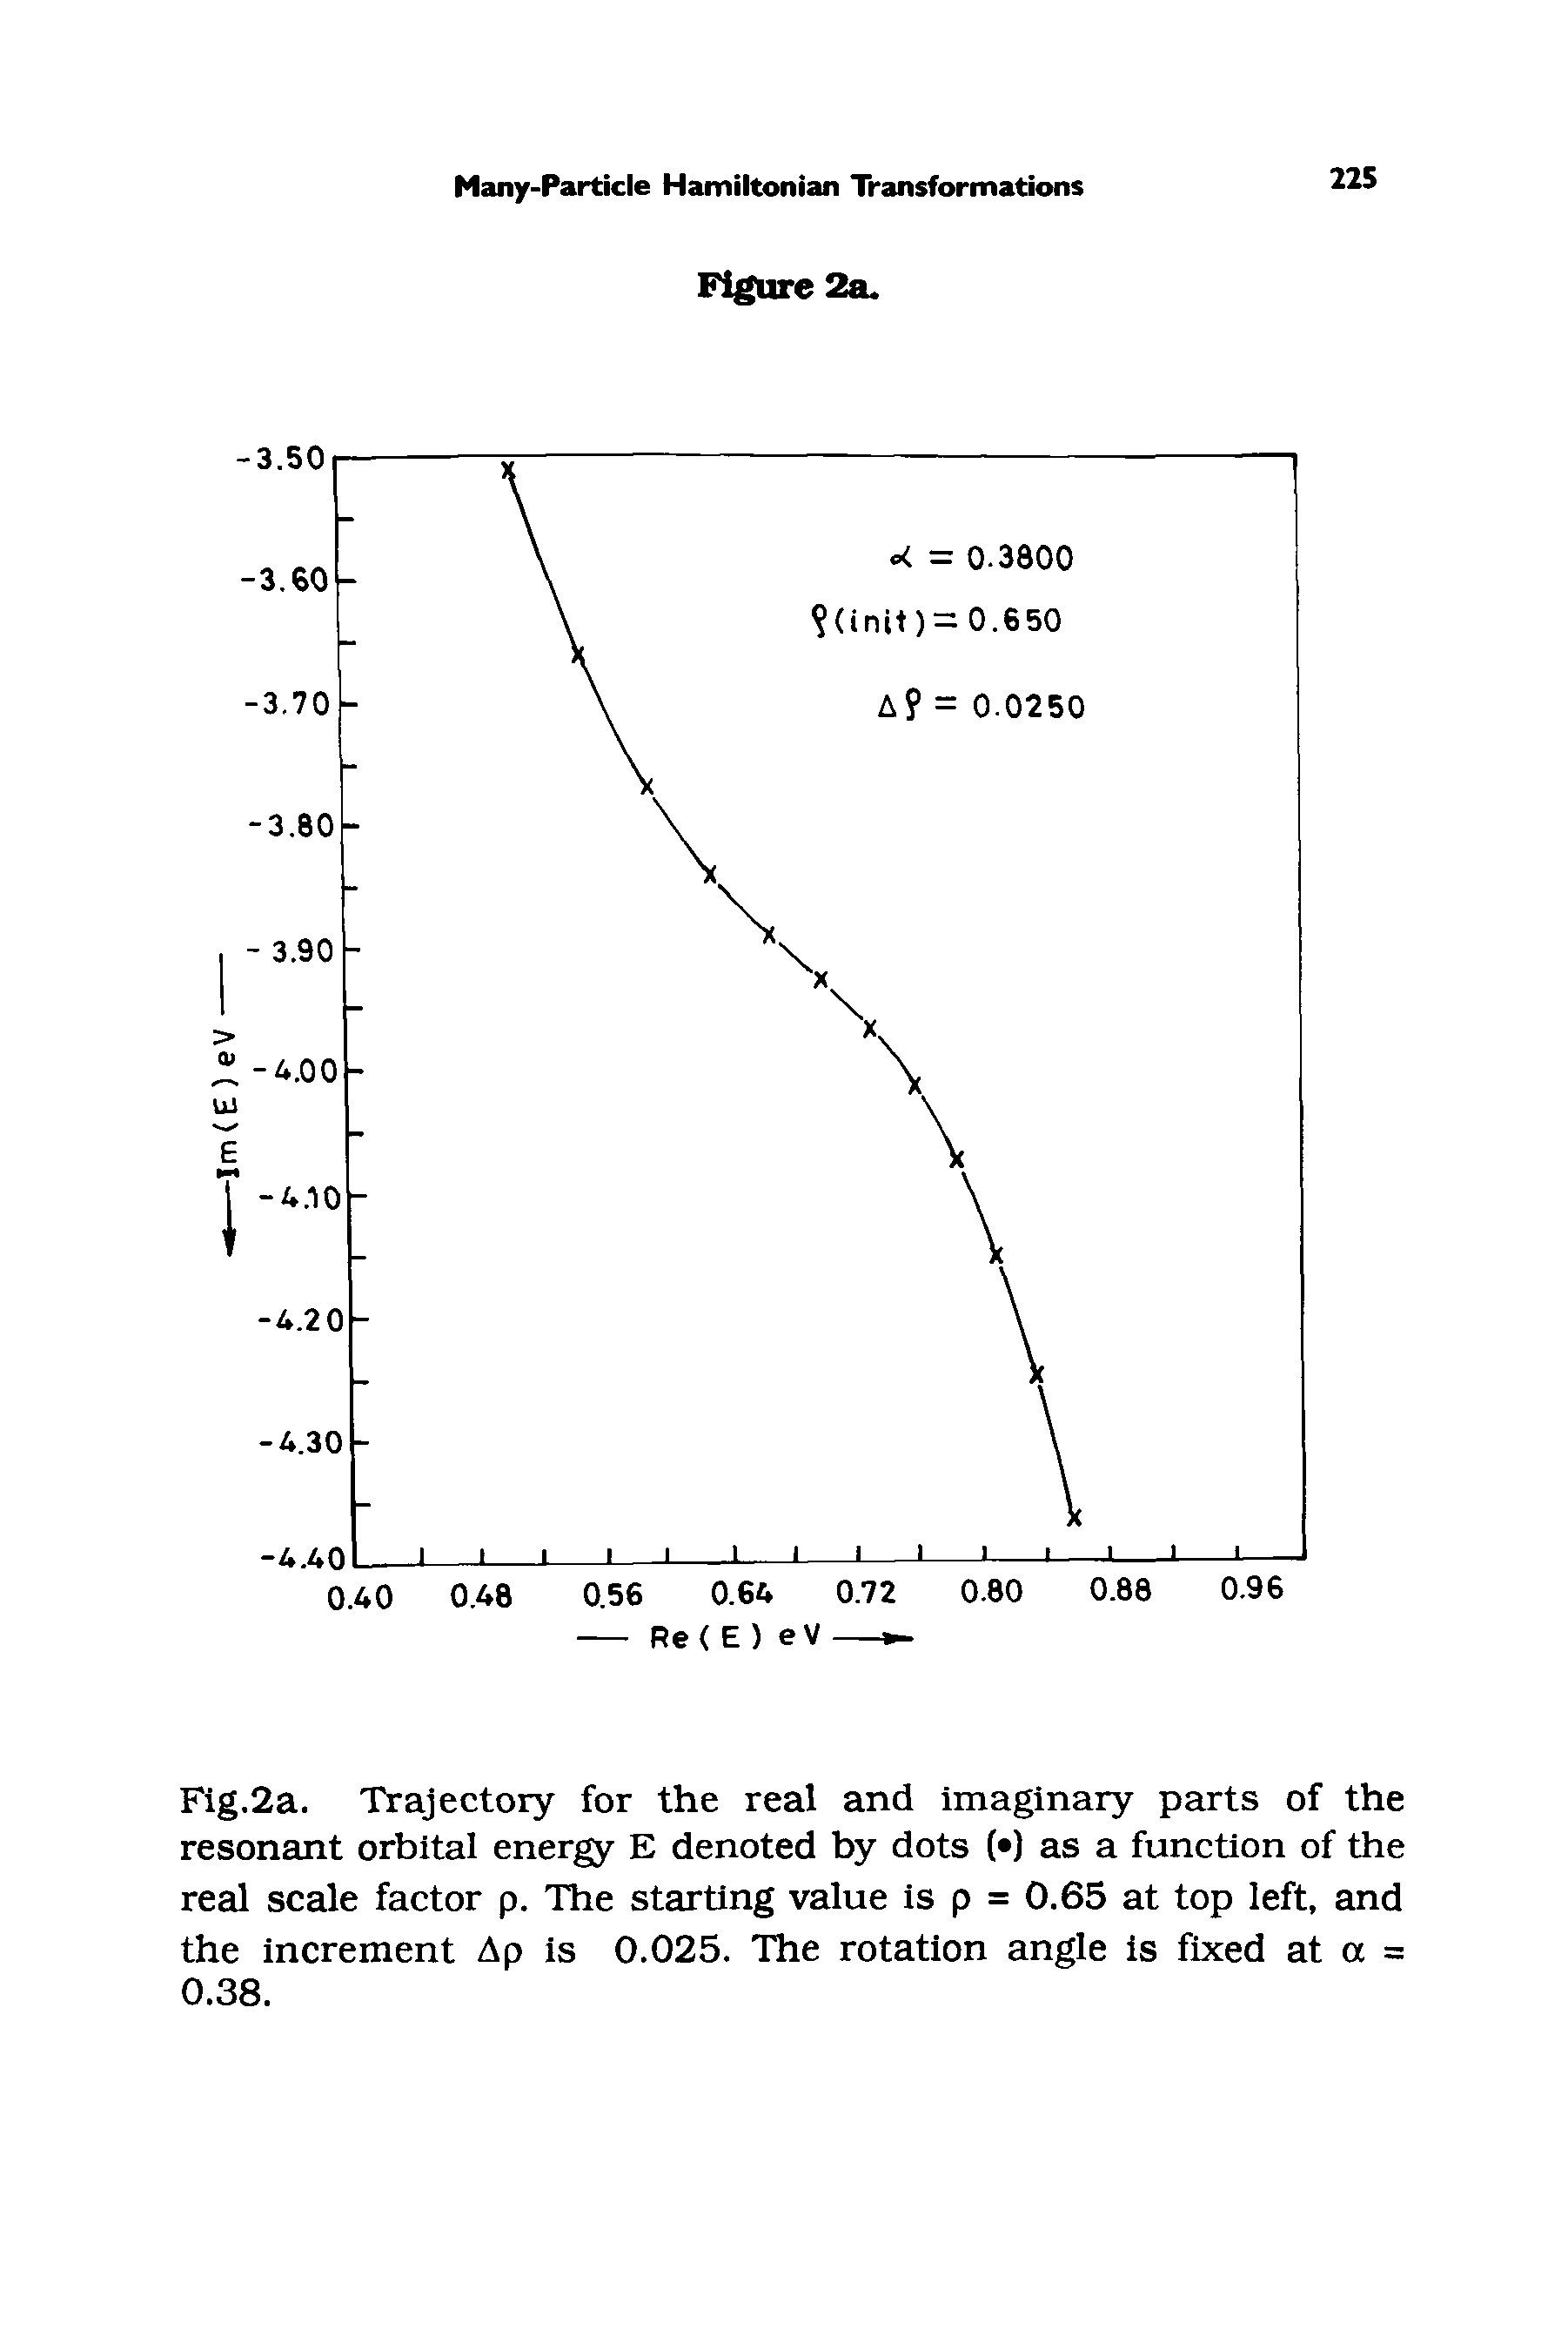 Fig.2a. Trajectory for the real and imaginary parts of the resonant orbital energy E denoted by dots ( ) as a function of the real scale factor p. The starting value is p = 0.65 at top left, and the increment Ap is 0.025. The rotation angle is fixed at a = 0.38.